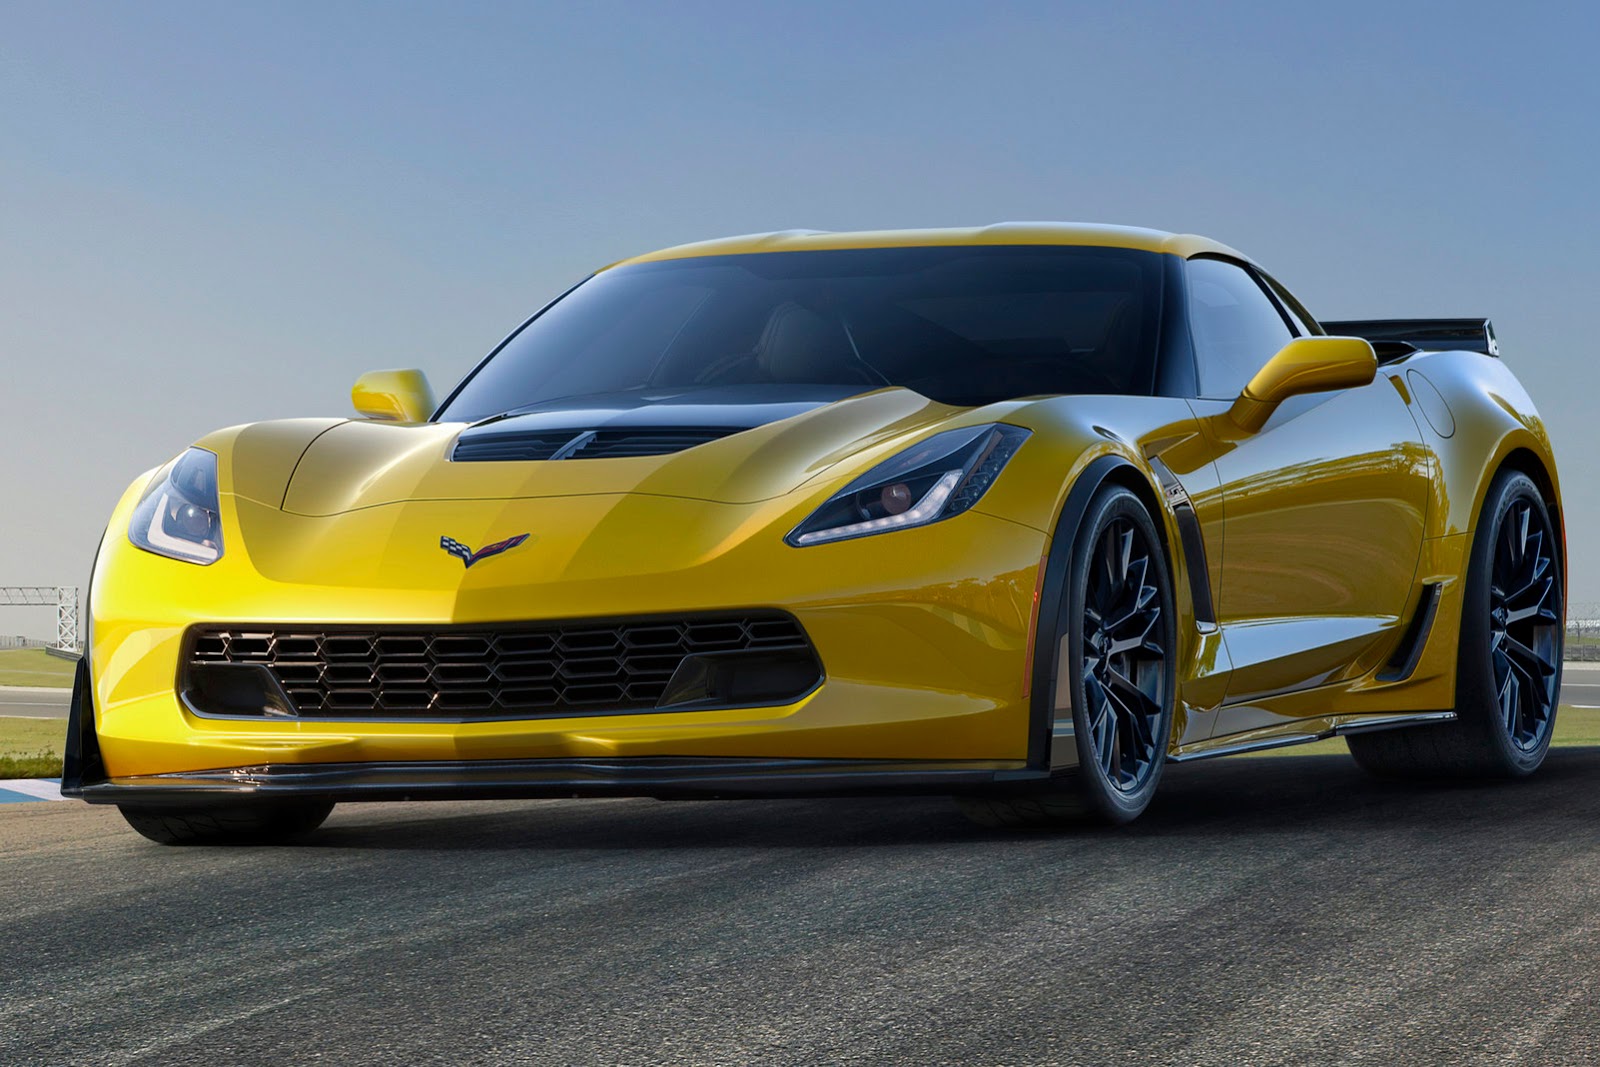 2015 Corvette Z06 Has 625HP, Is Faster Than C6 ZR1 on the Track! w/Video.